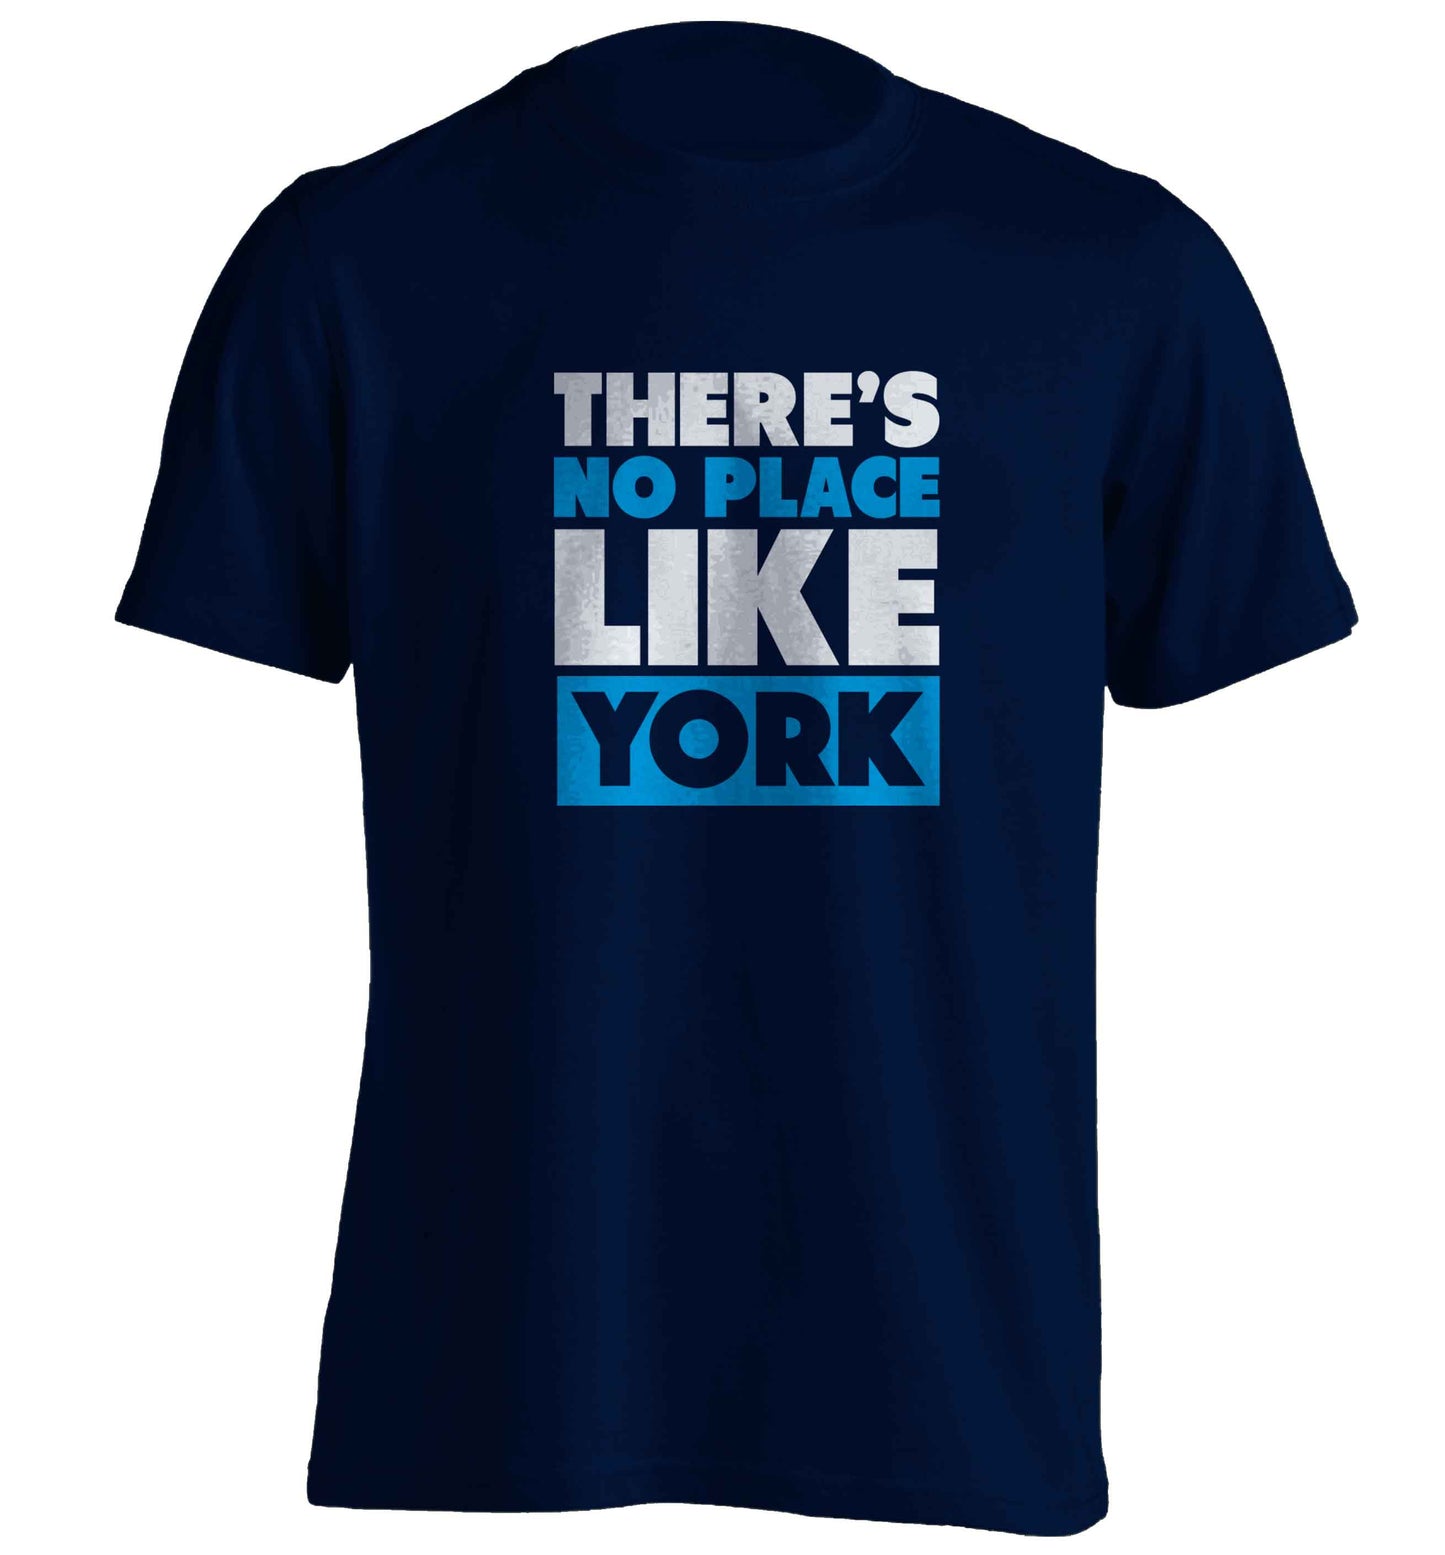 There's no place like york adults unisex navy Tshirt 2XL